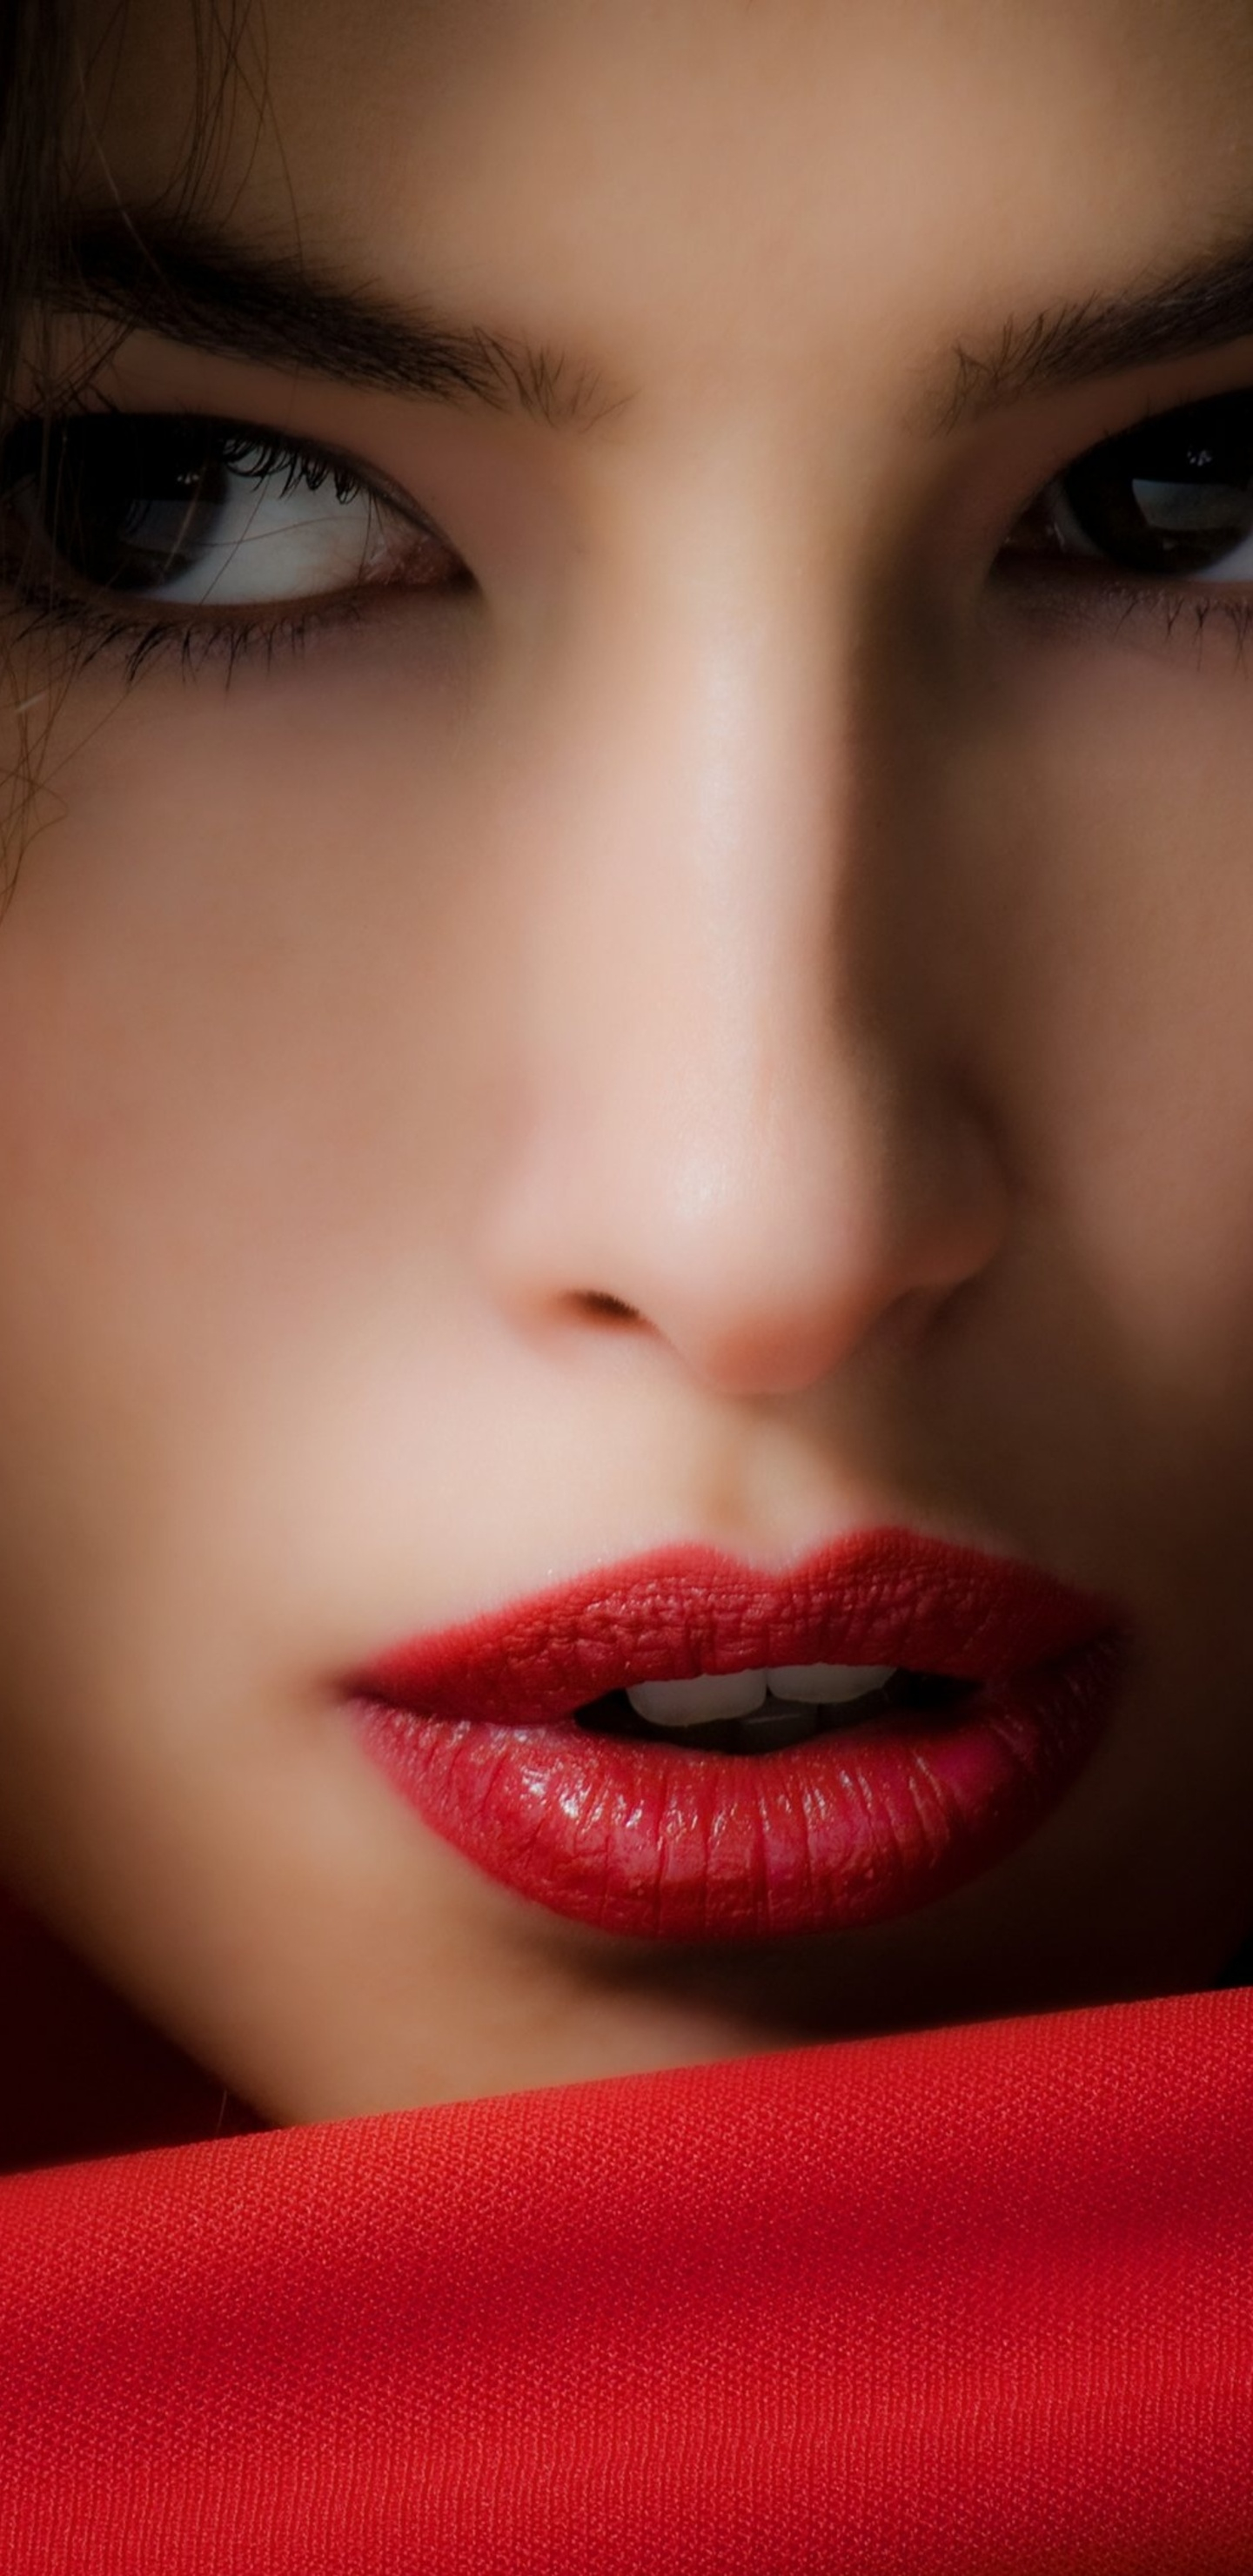 1440x2960 Red Lips Girl 4k Samsung Galaxy Note 9,8, S9,S8,S8+ QHD HD 4k Wallpapers, Images, Backgrounds, Photos and Pictures